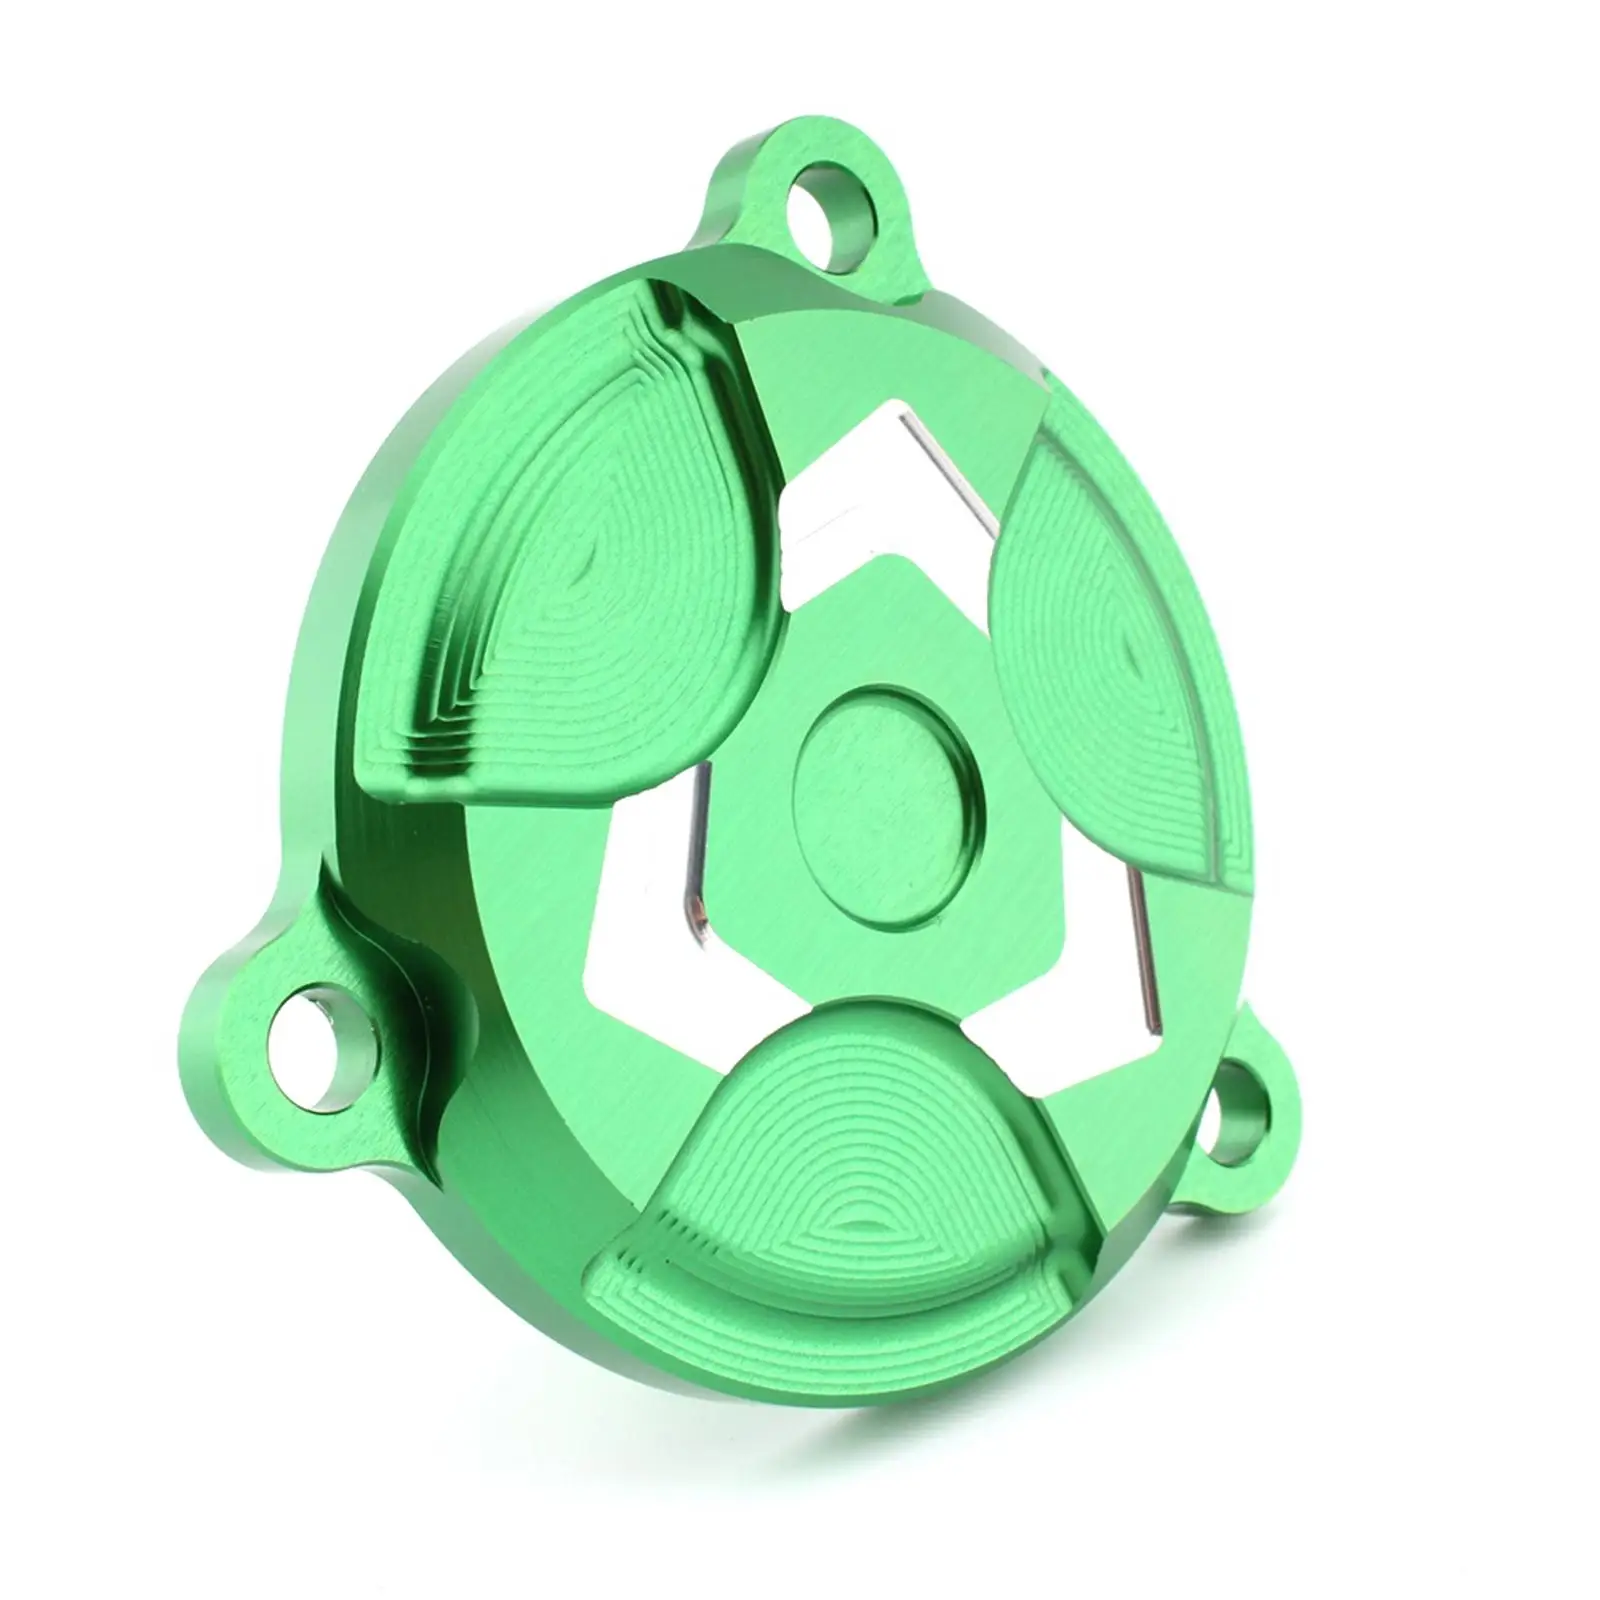  Cover     for Klx125  Klx150BF  Bike Replacement Part Decoration Green